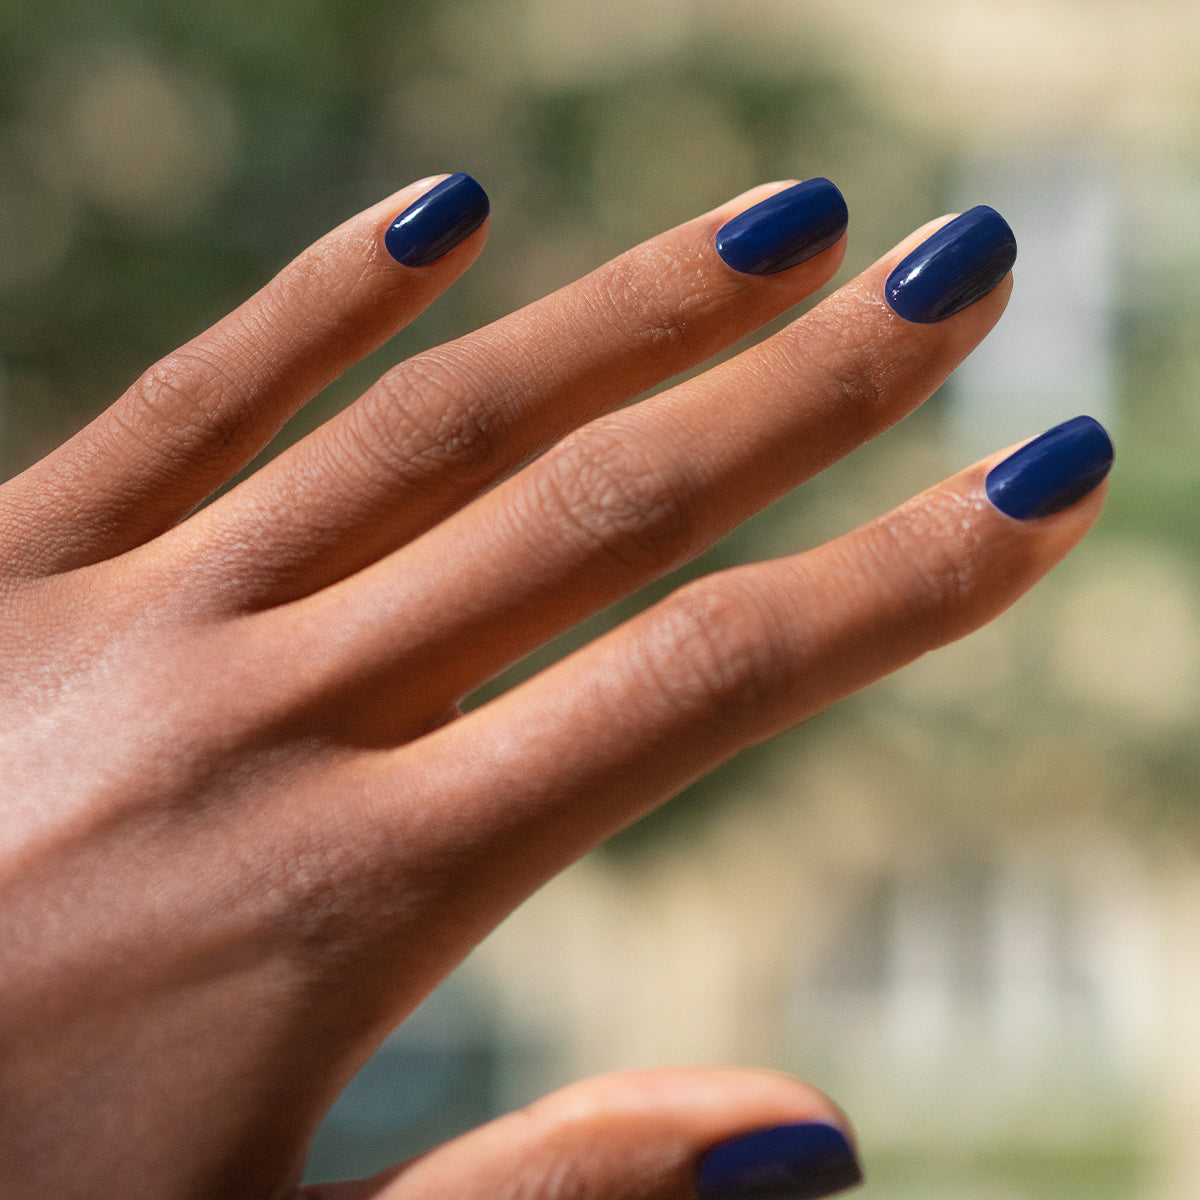 Get the Royal treatment with these elegant royal blue nail designs 💙✨ .  Simple French mani to add the perfect pop of color From @lam... | Instagram